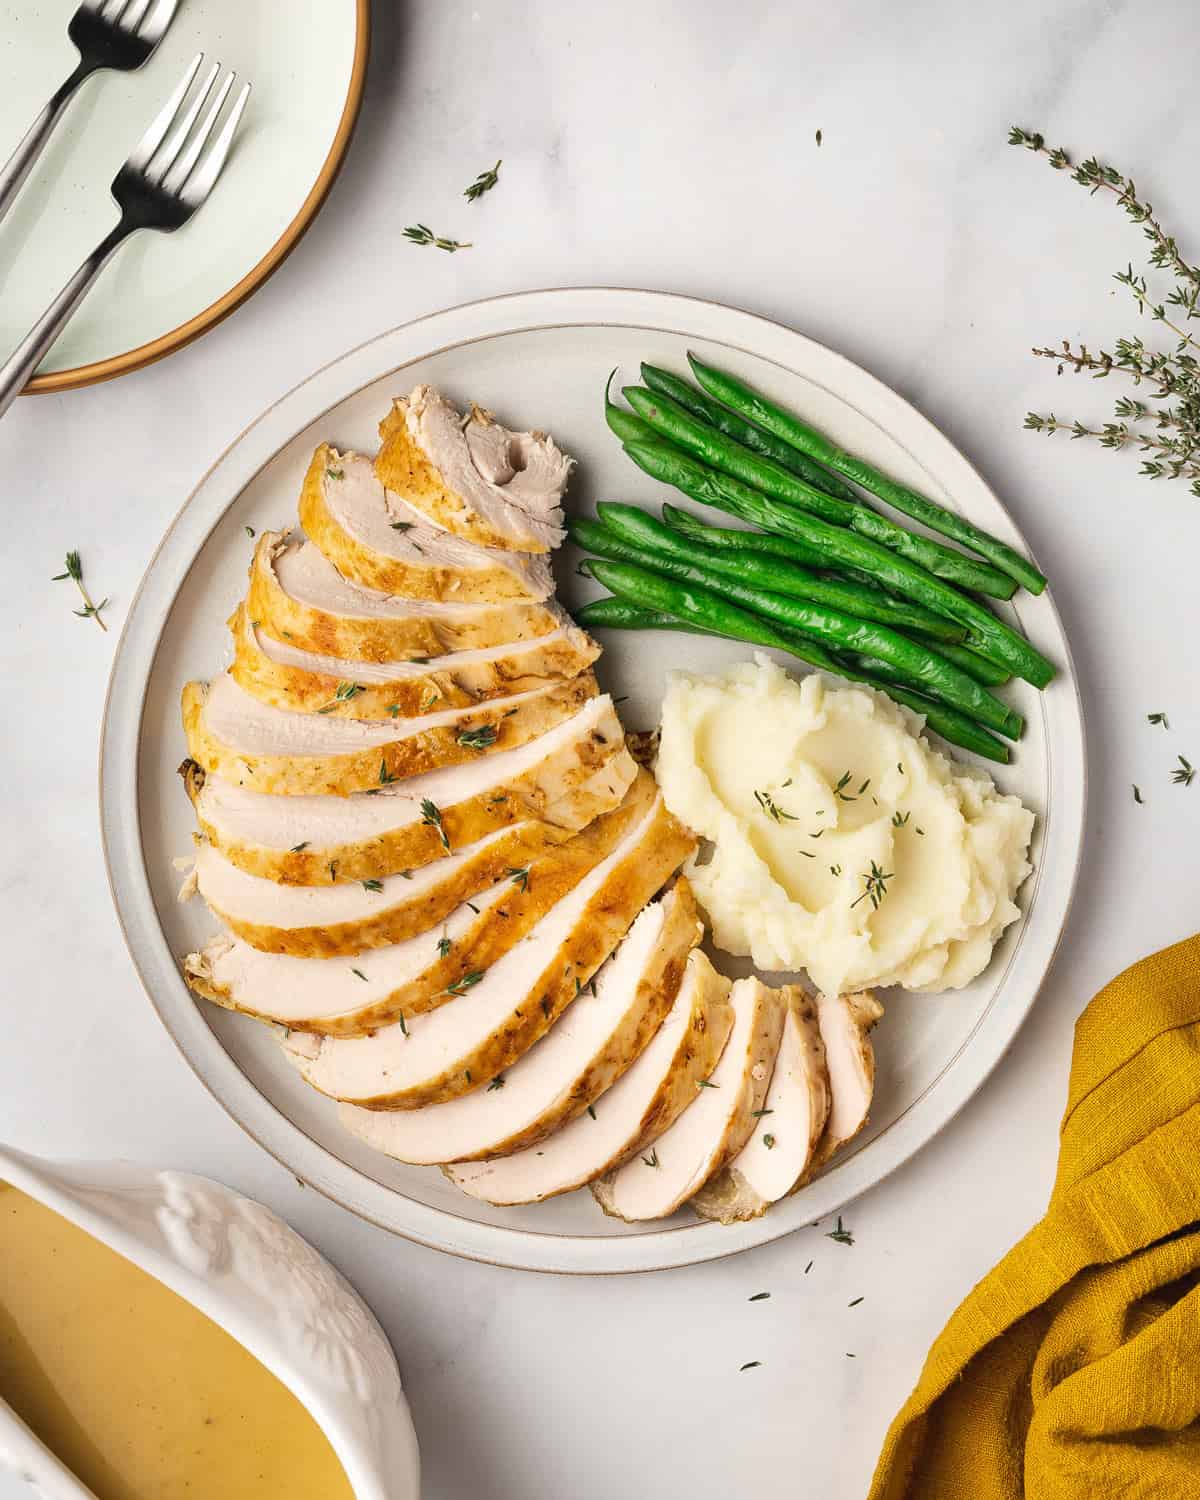 A large place with sliced slow cooker turkey breast with a side of mashed potatoes and green beans.